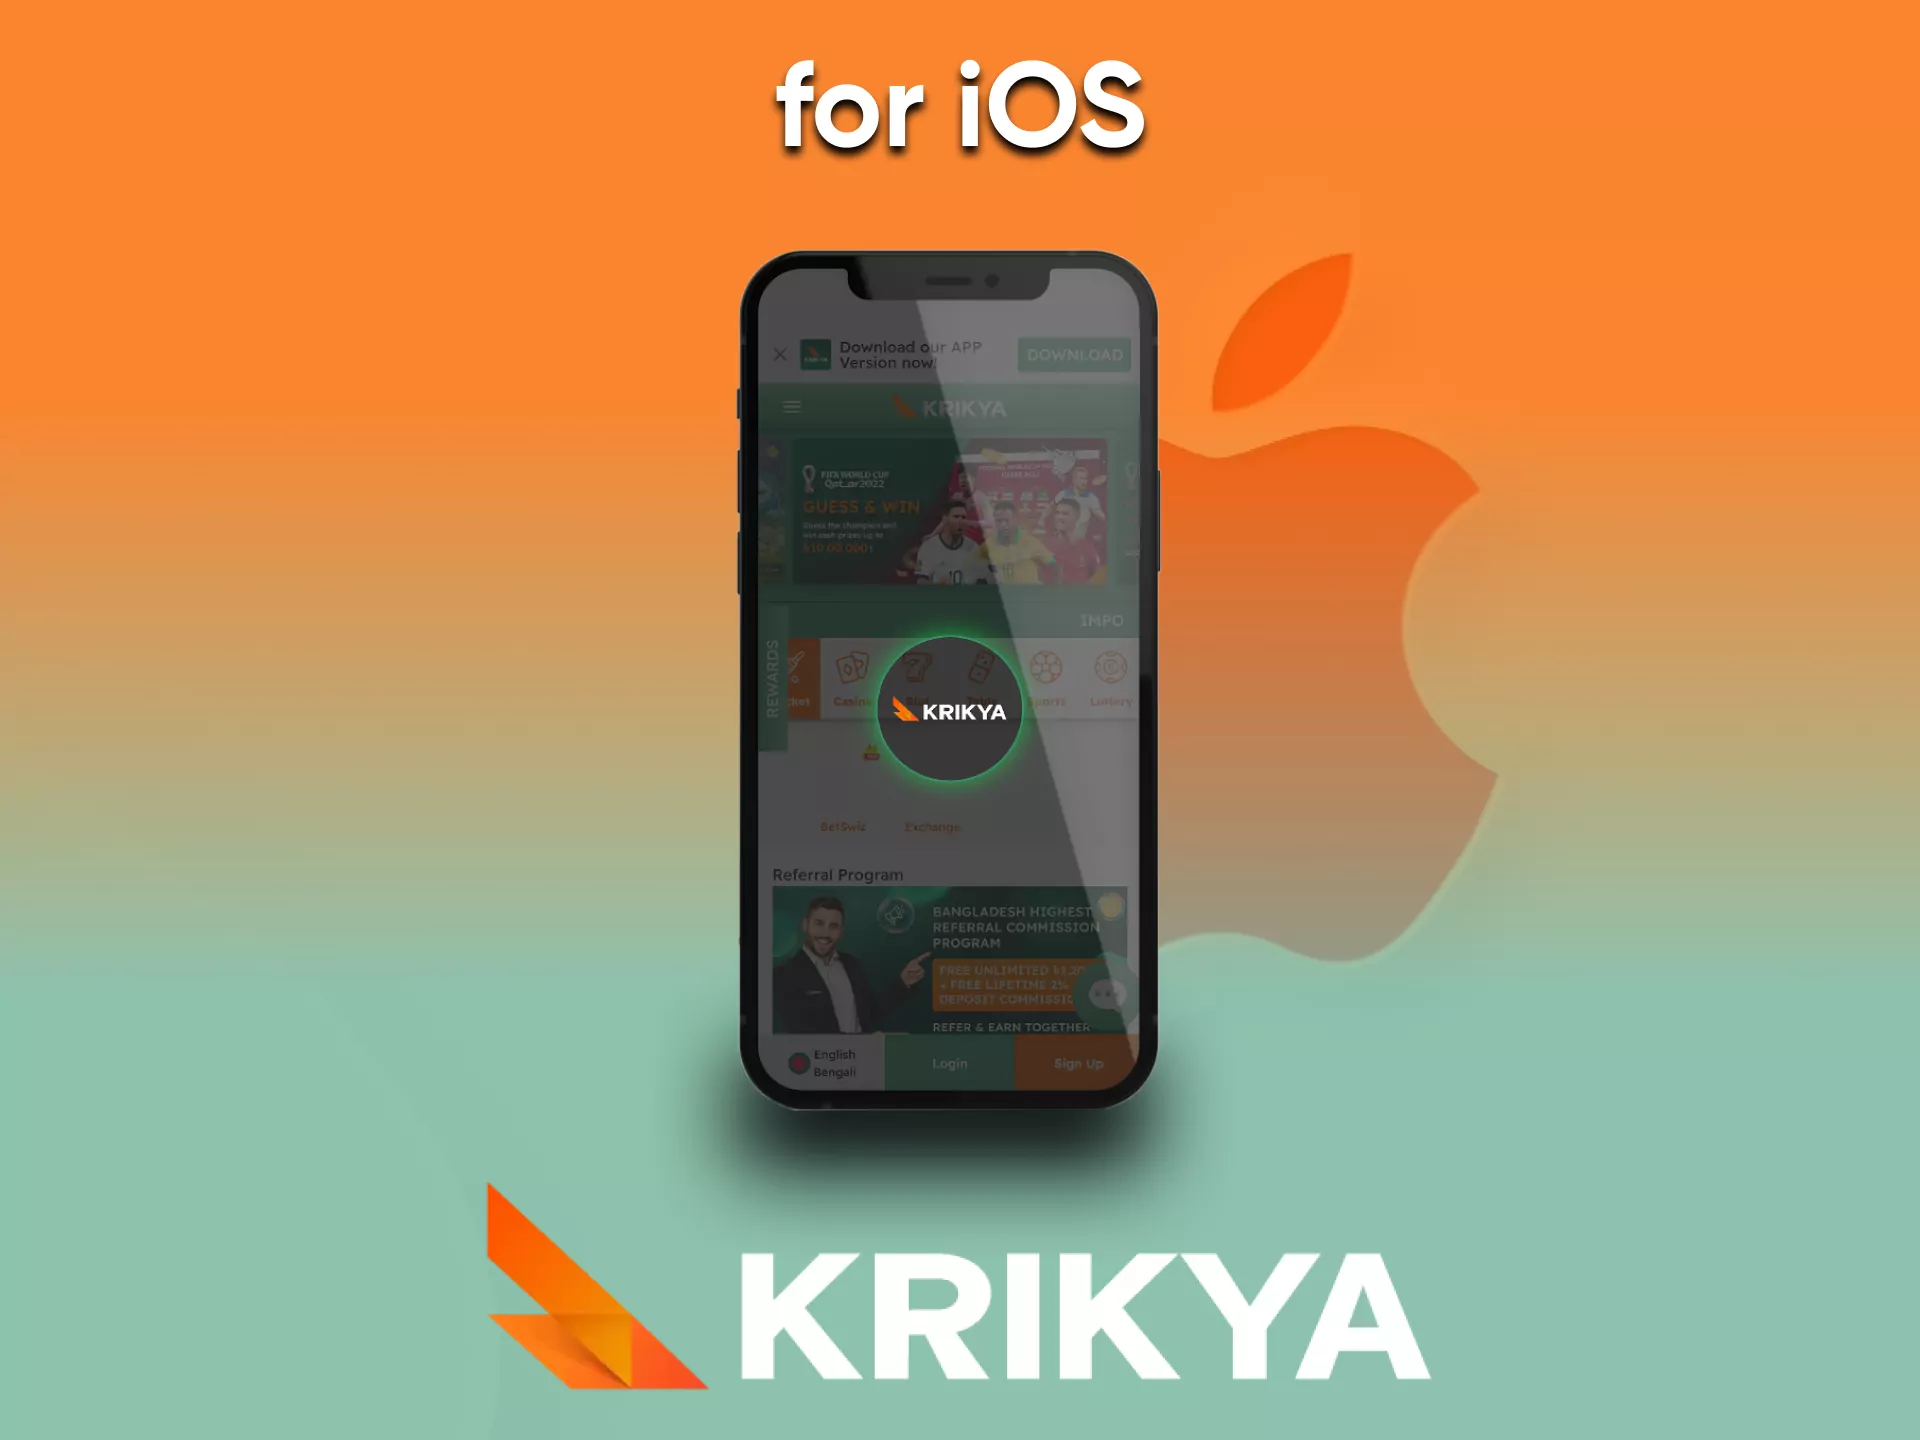 On iOS platforms, you can also play at Krikya Casino.